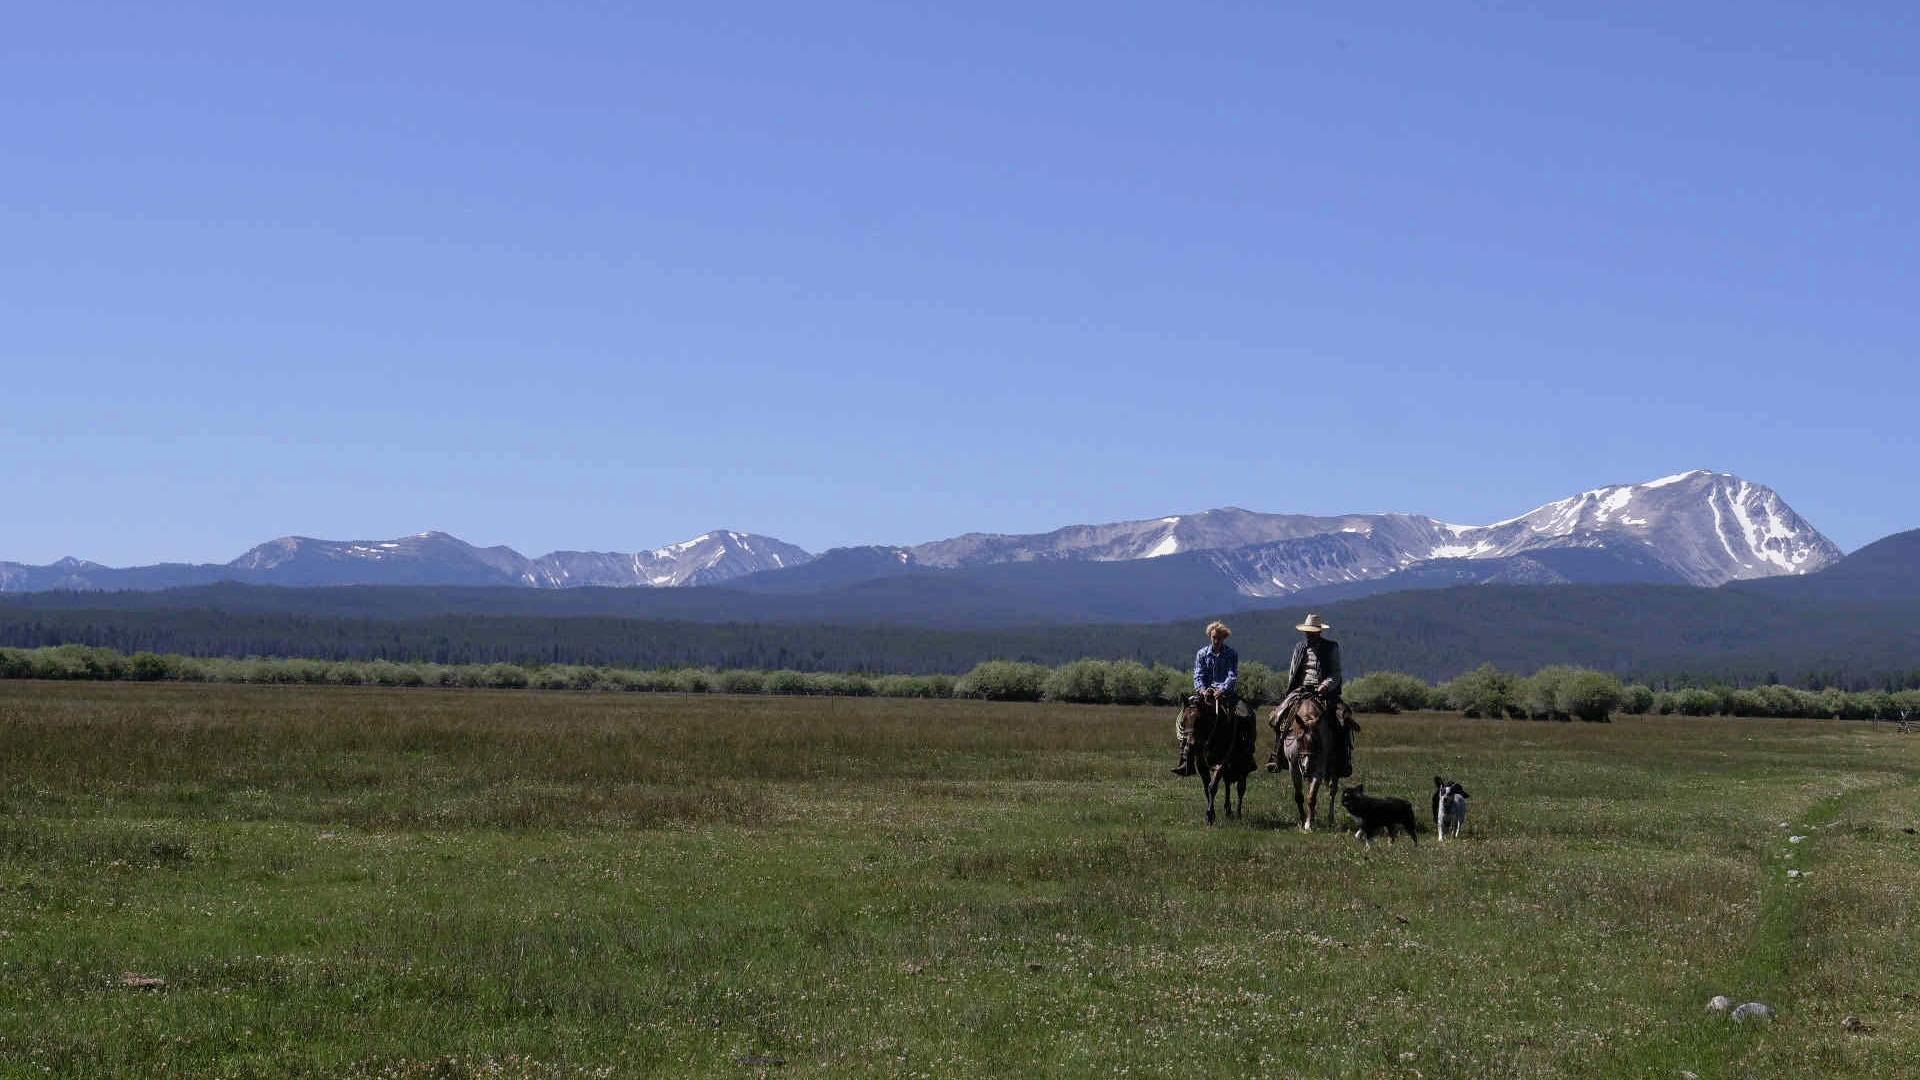 Dean and Malcom Peterson on their cattle ranch in Wisdom, Montana.